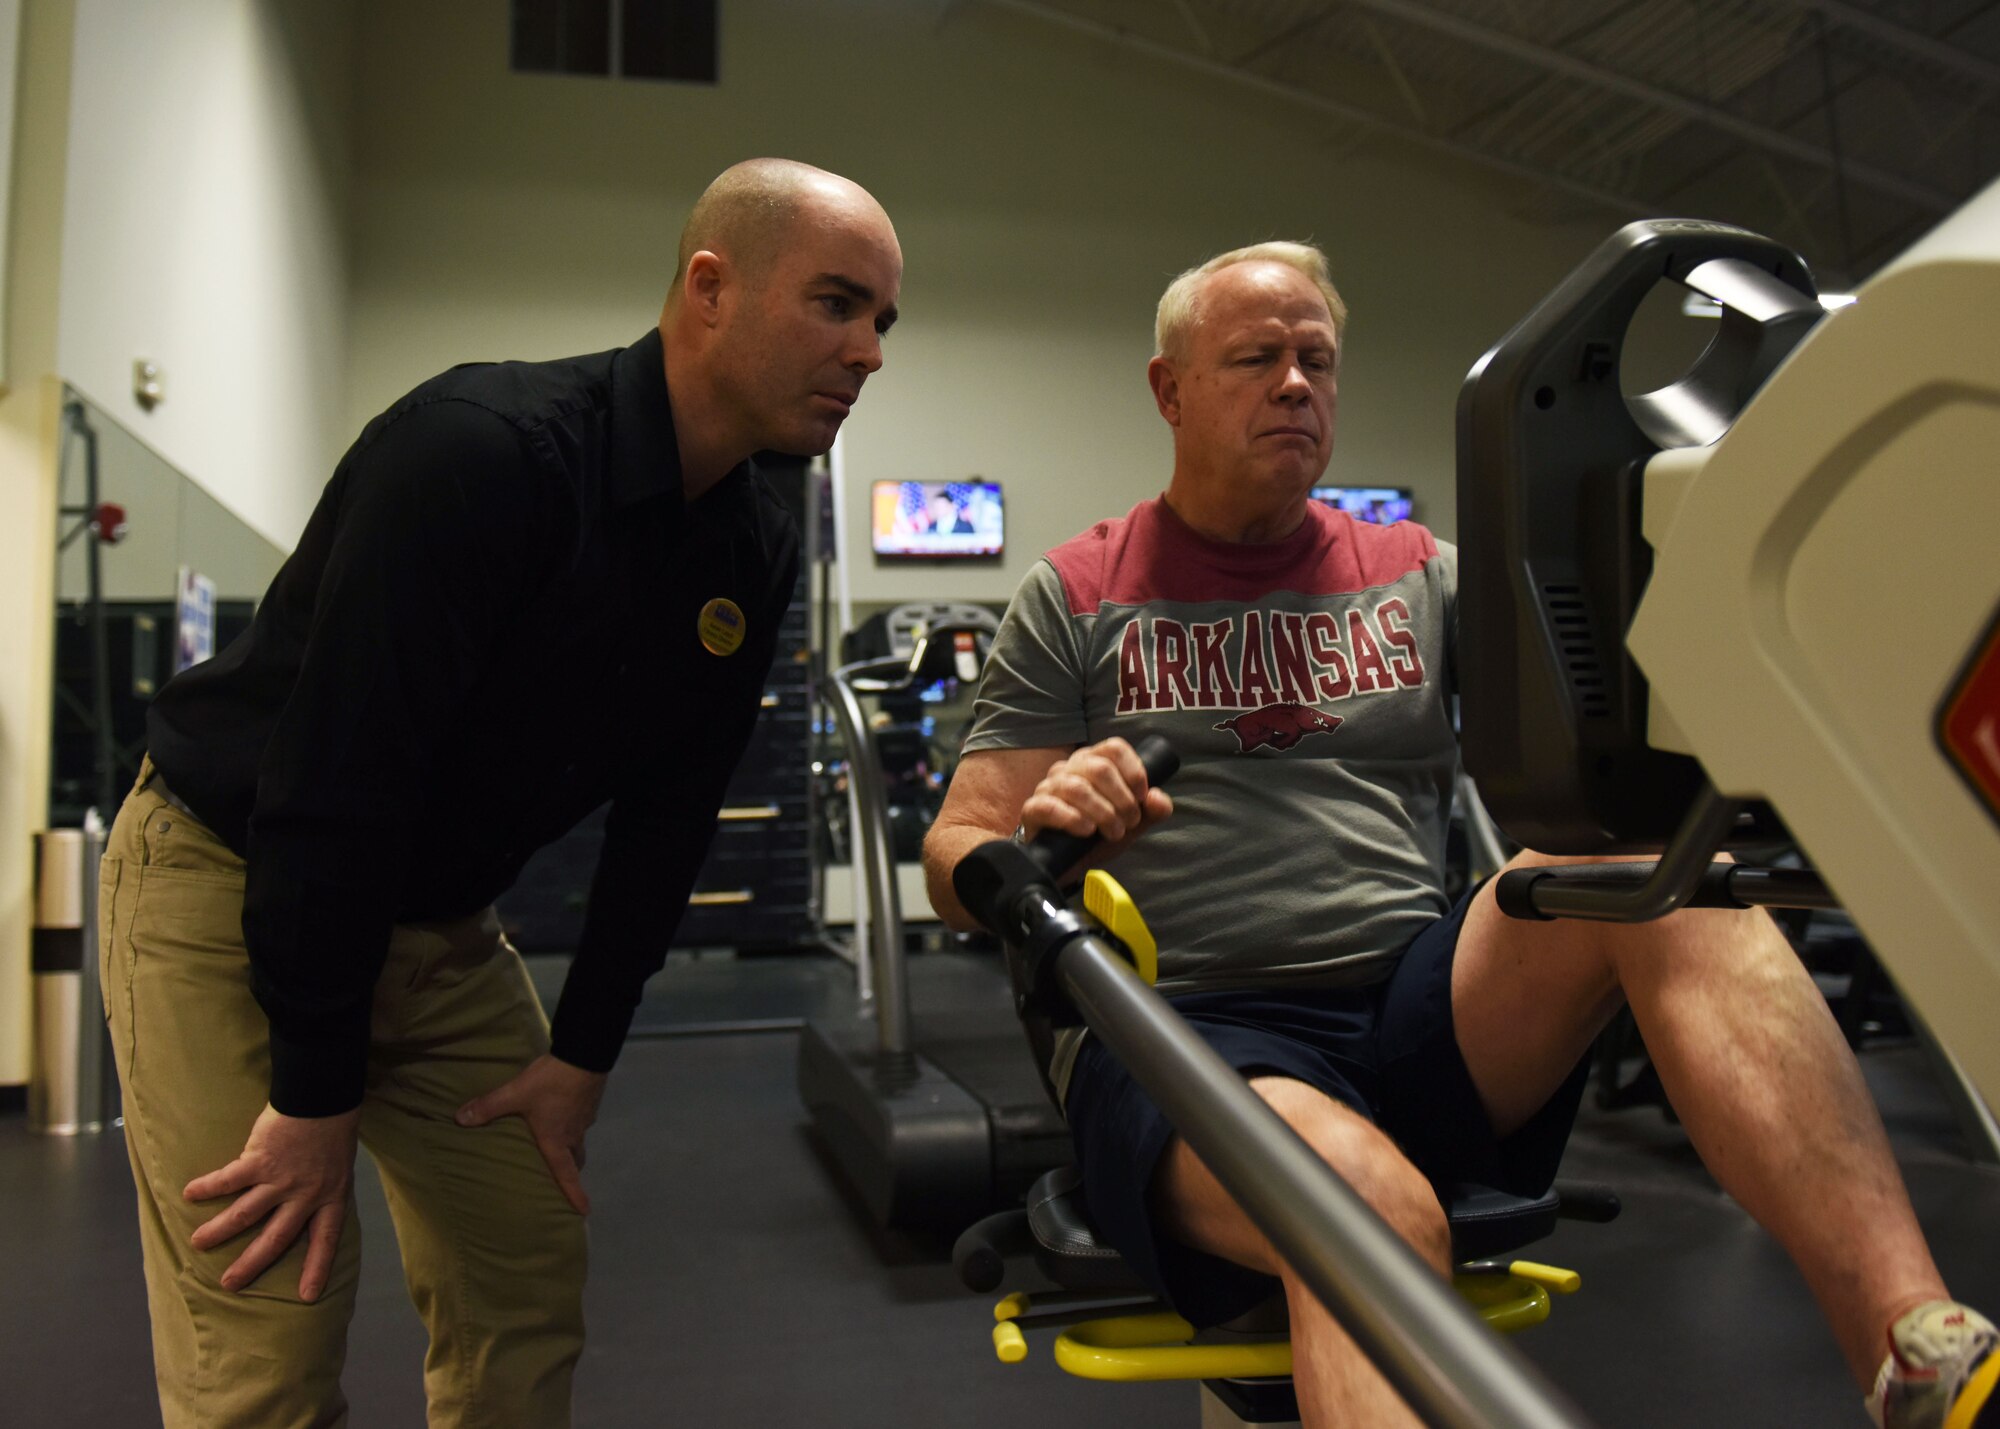 Aaron Leach, left, 19th Force Support Squadron fitness director, trains Michael Smith, retired U.S. Army sergeant first class, on a recumbent elliptical Feb. 2, 2017, at the Fitness Center on Little Rock Air Force Base, Ark. The recumbent elliptical is a new addition to the Fitness Center and creates an adaptive fitness area for those with injuries. (U.S. Air Force photo by Senior Airman Mercedes Taylor)